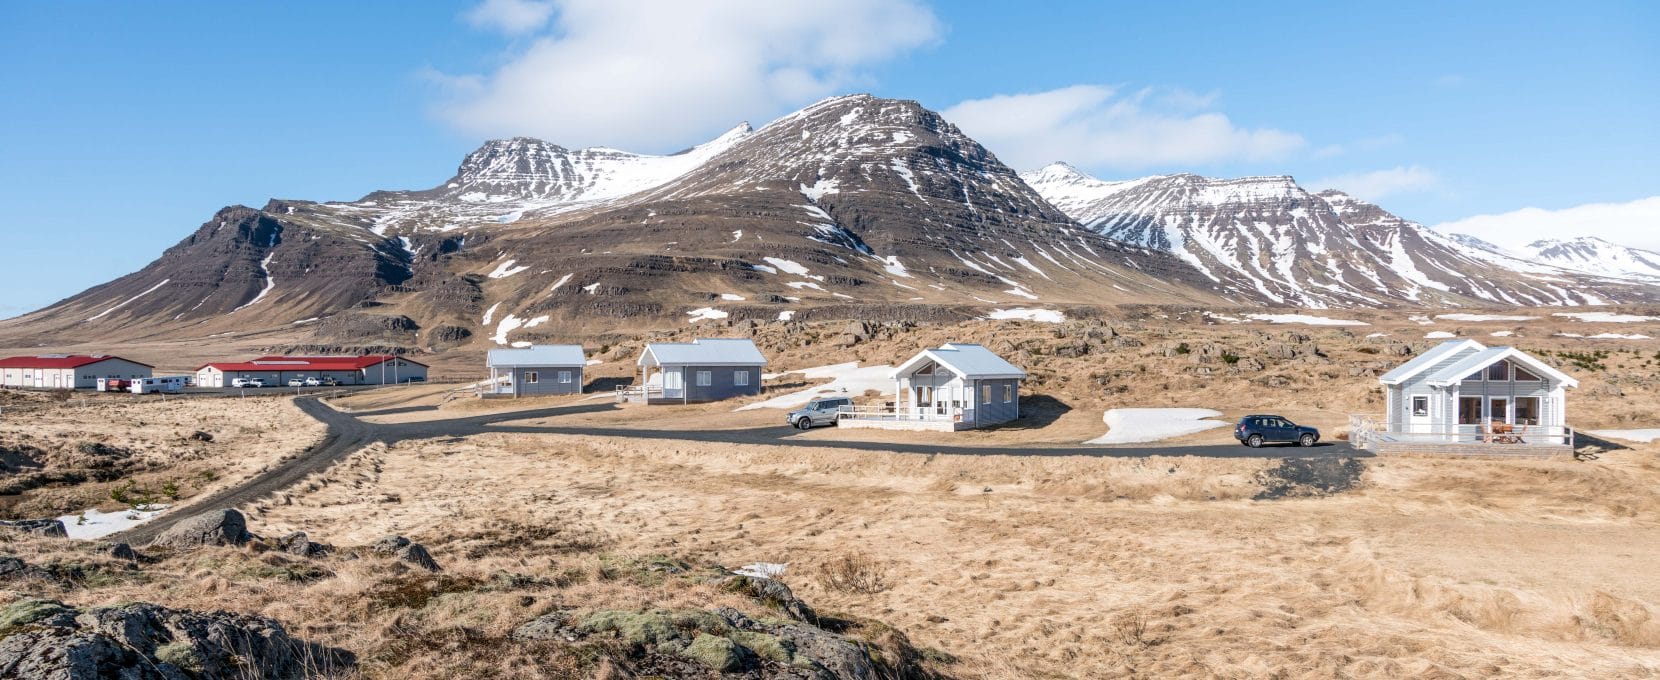 Our cottages in West Iceland